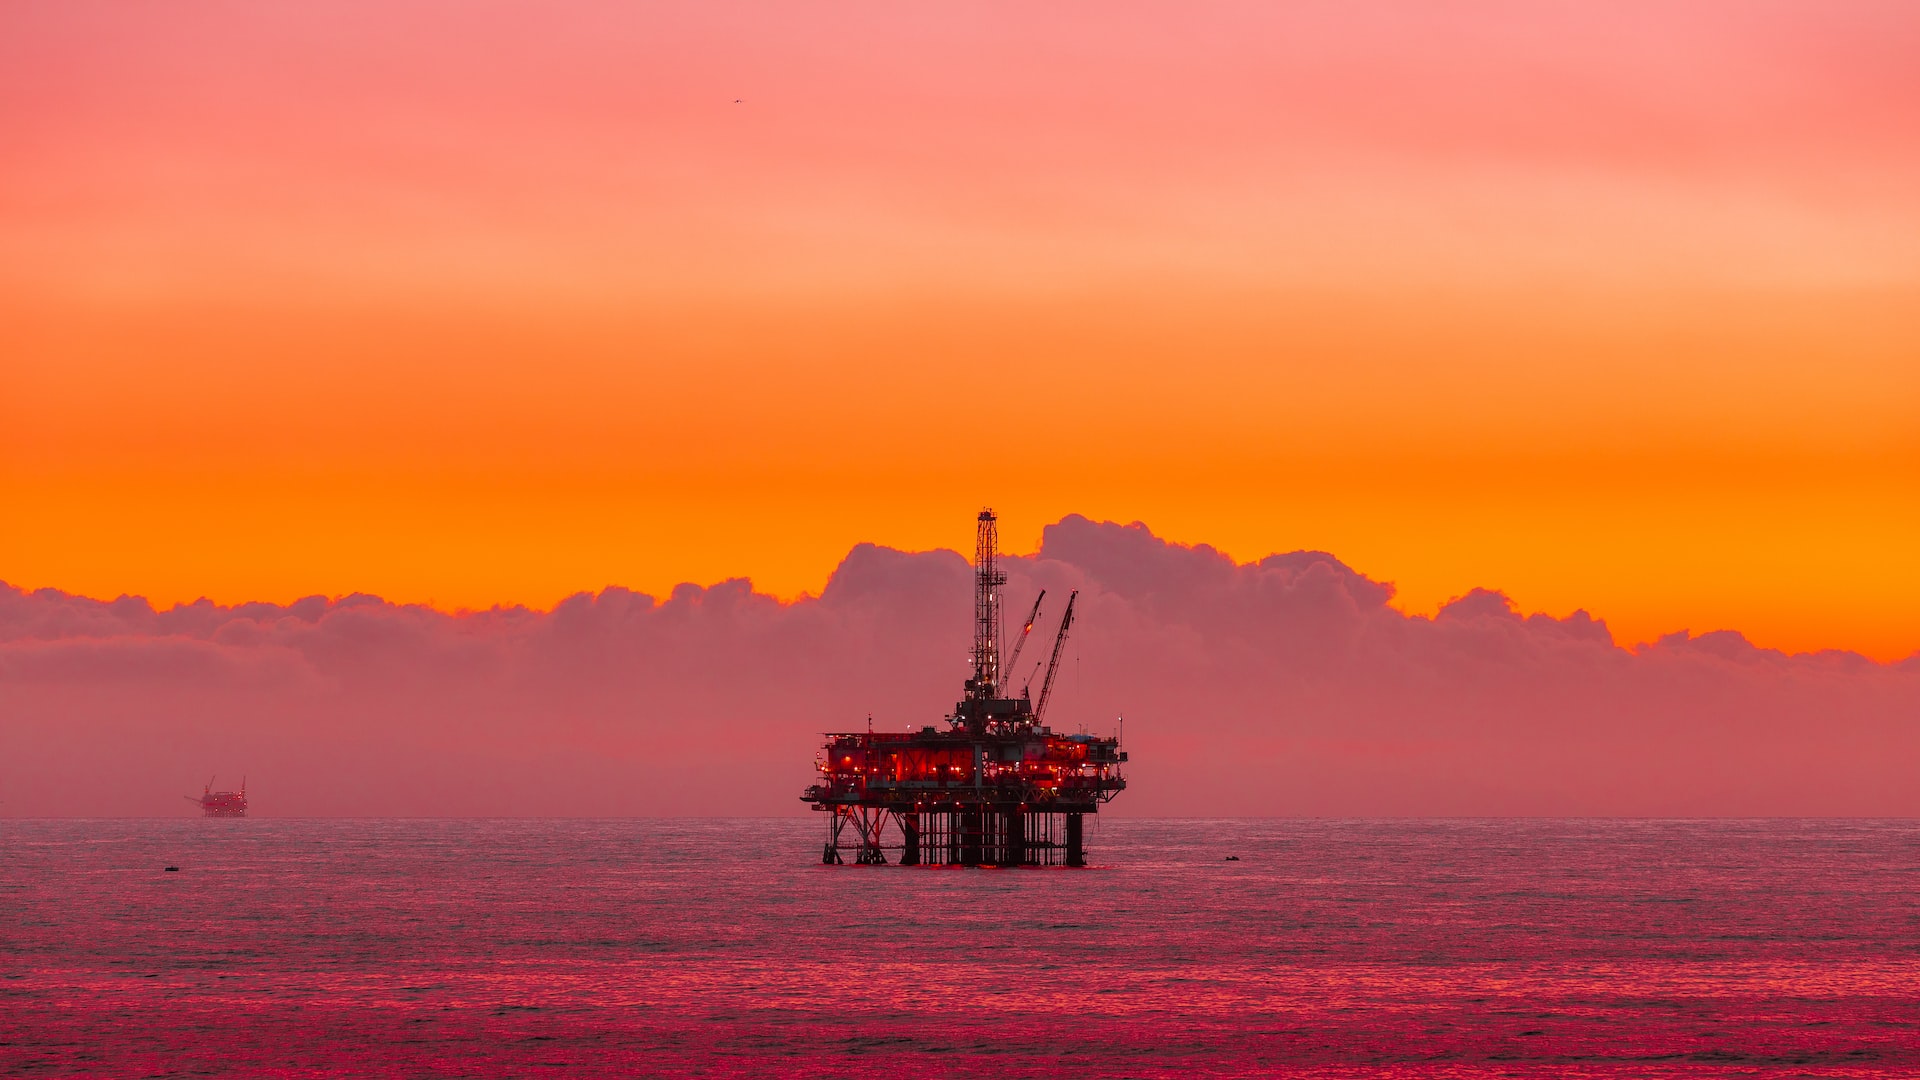 UK government adjusts windfall tax policy amidst concerns over North Sea industry impact